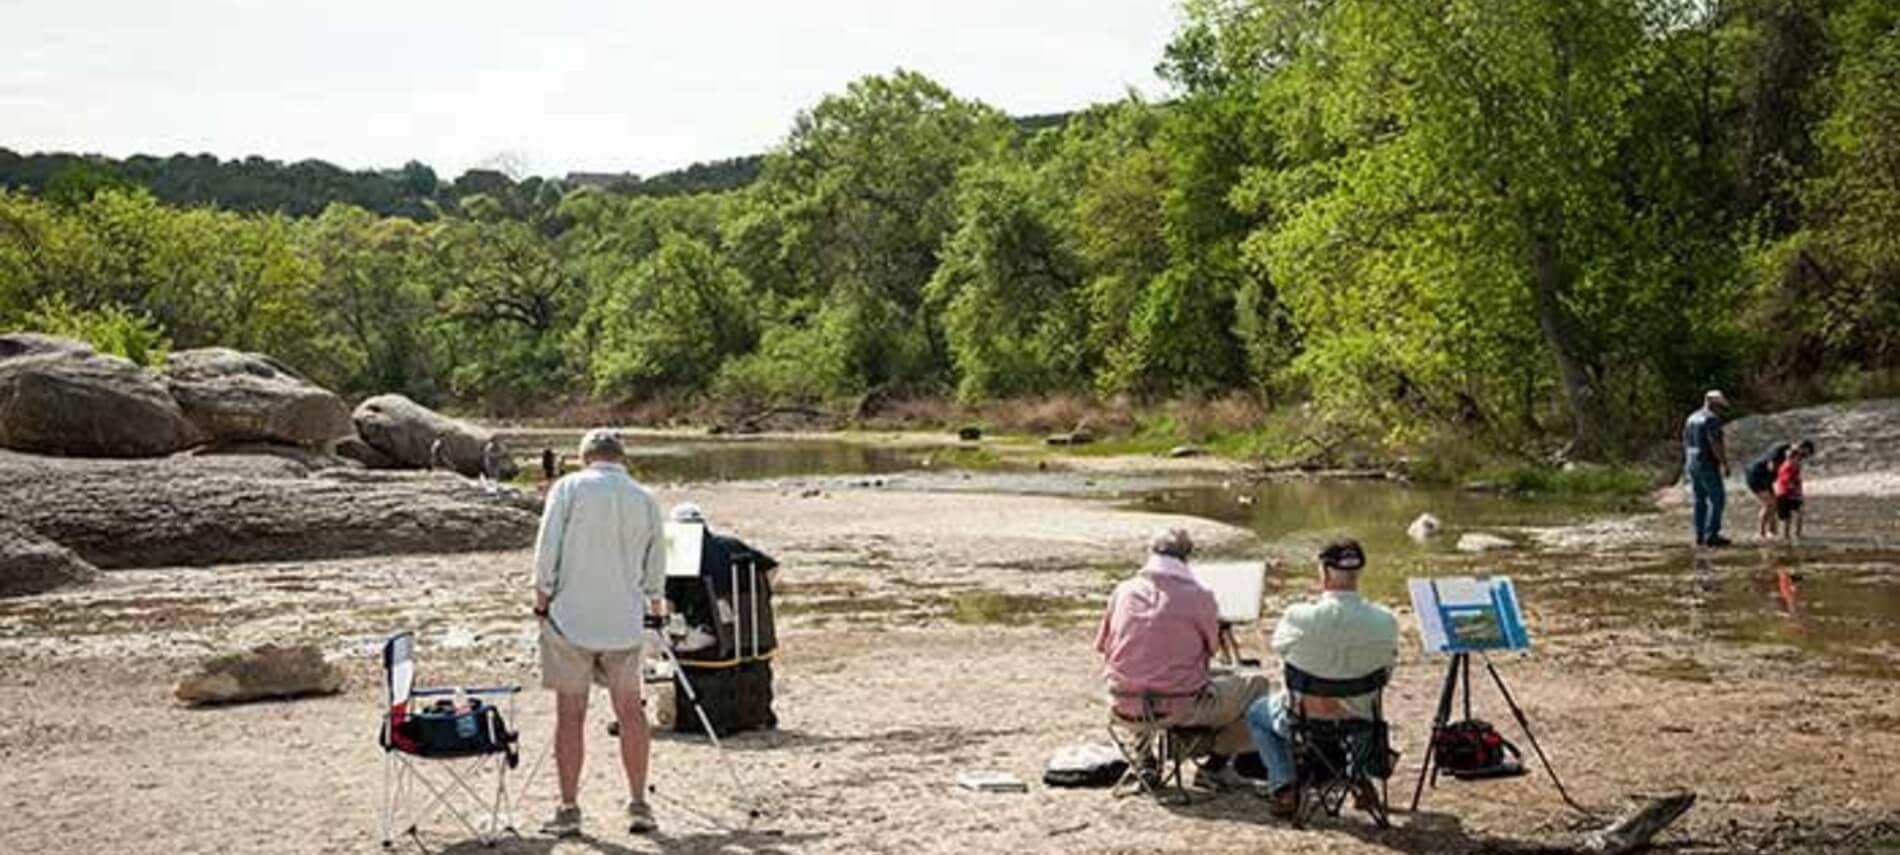 People paint, wade and sit next to a stream surrounded by green trees.